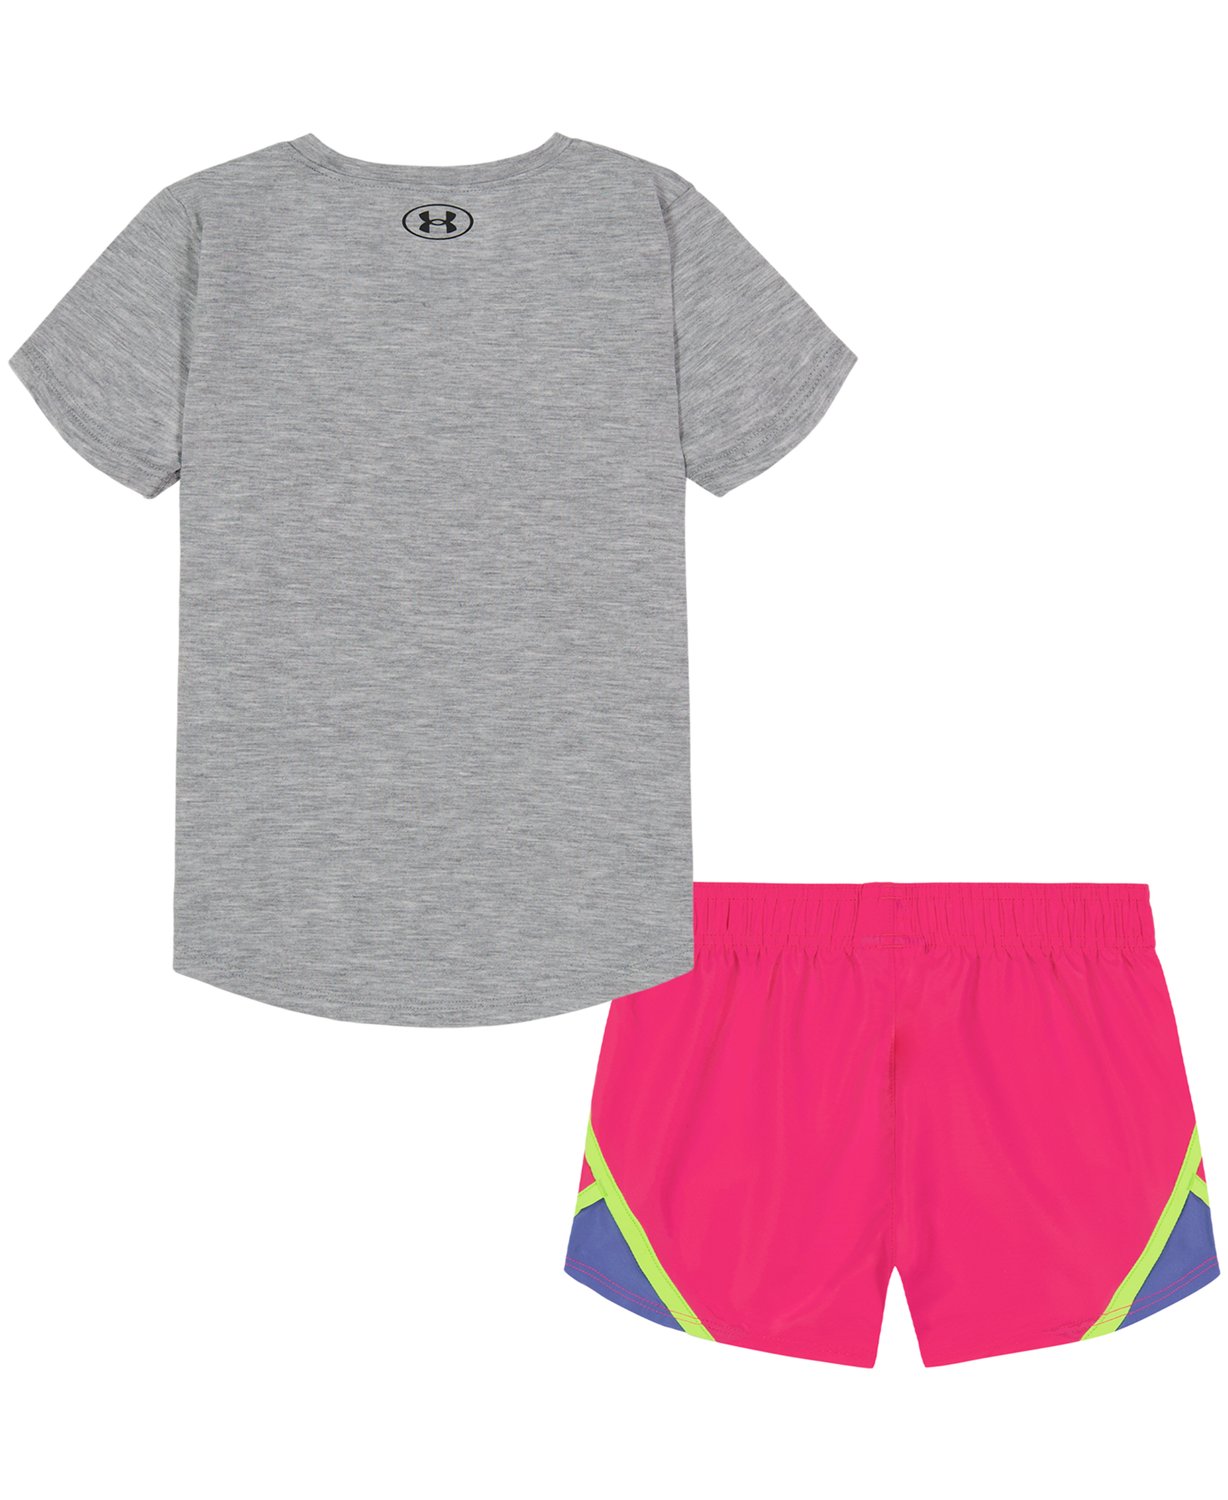 Under Armour Girls' Girl With Goals T-shirt and Shorts Set | Academy